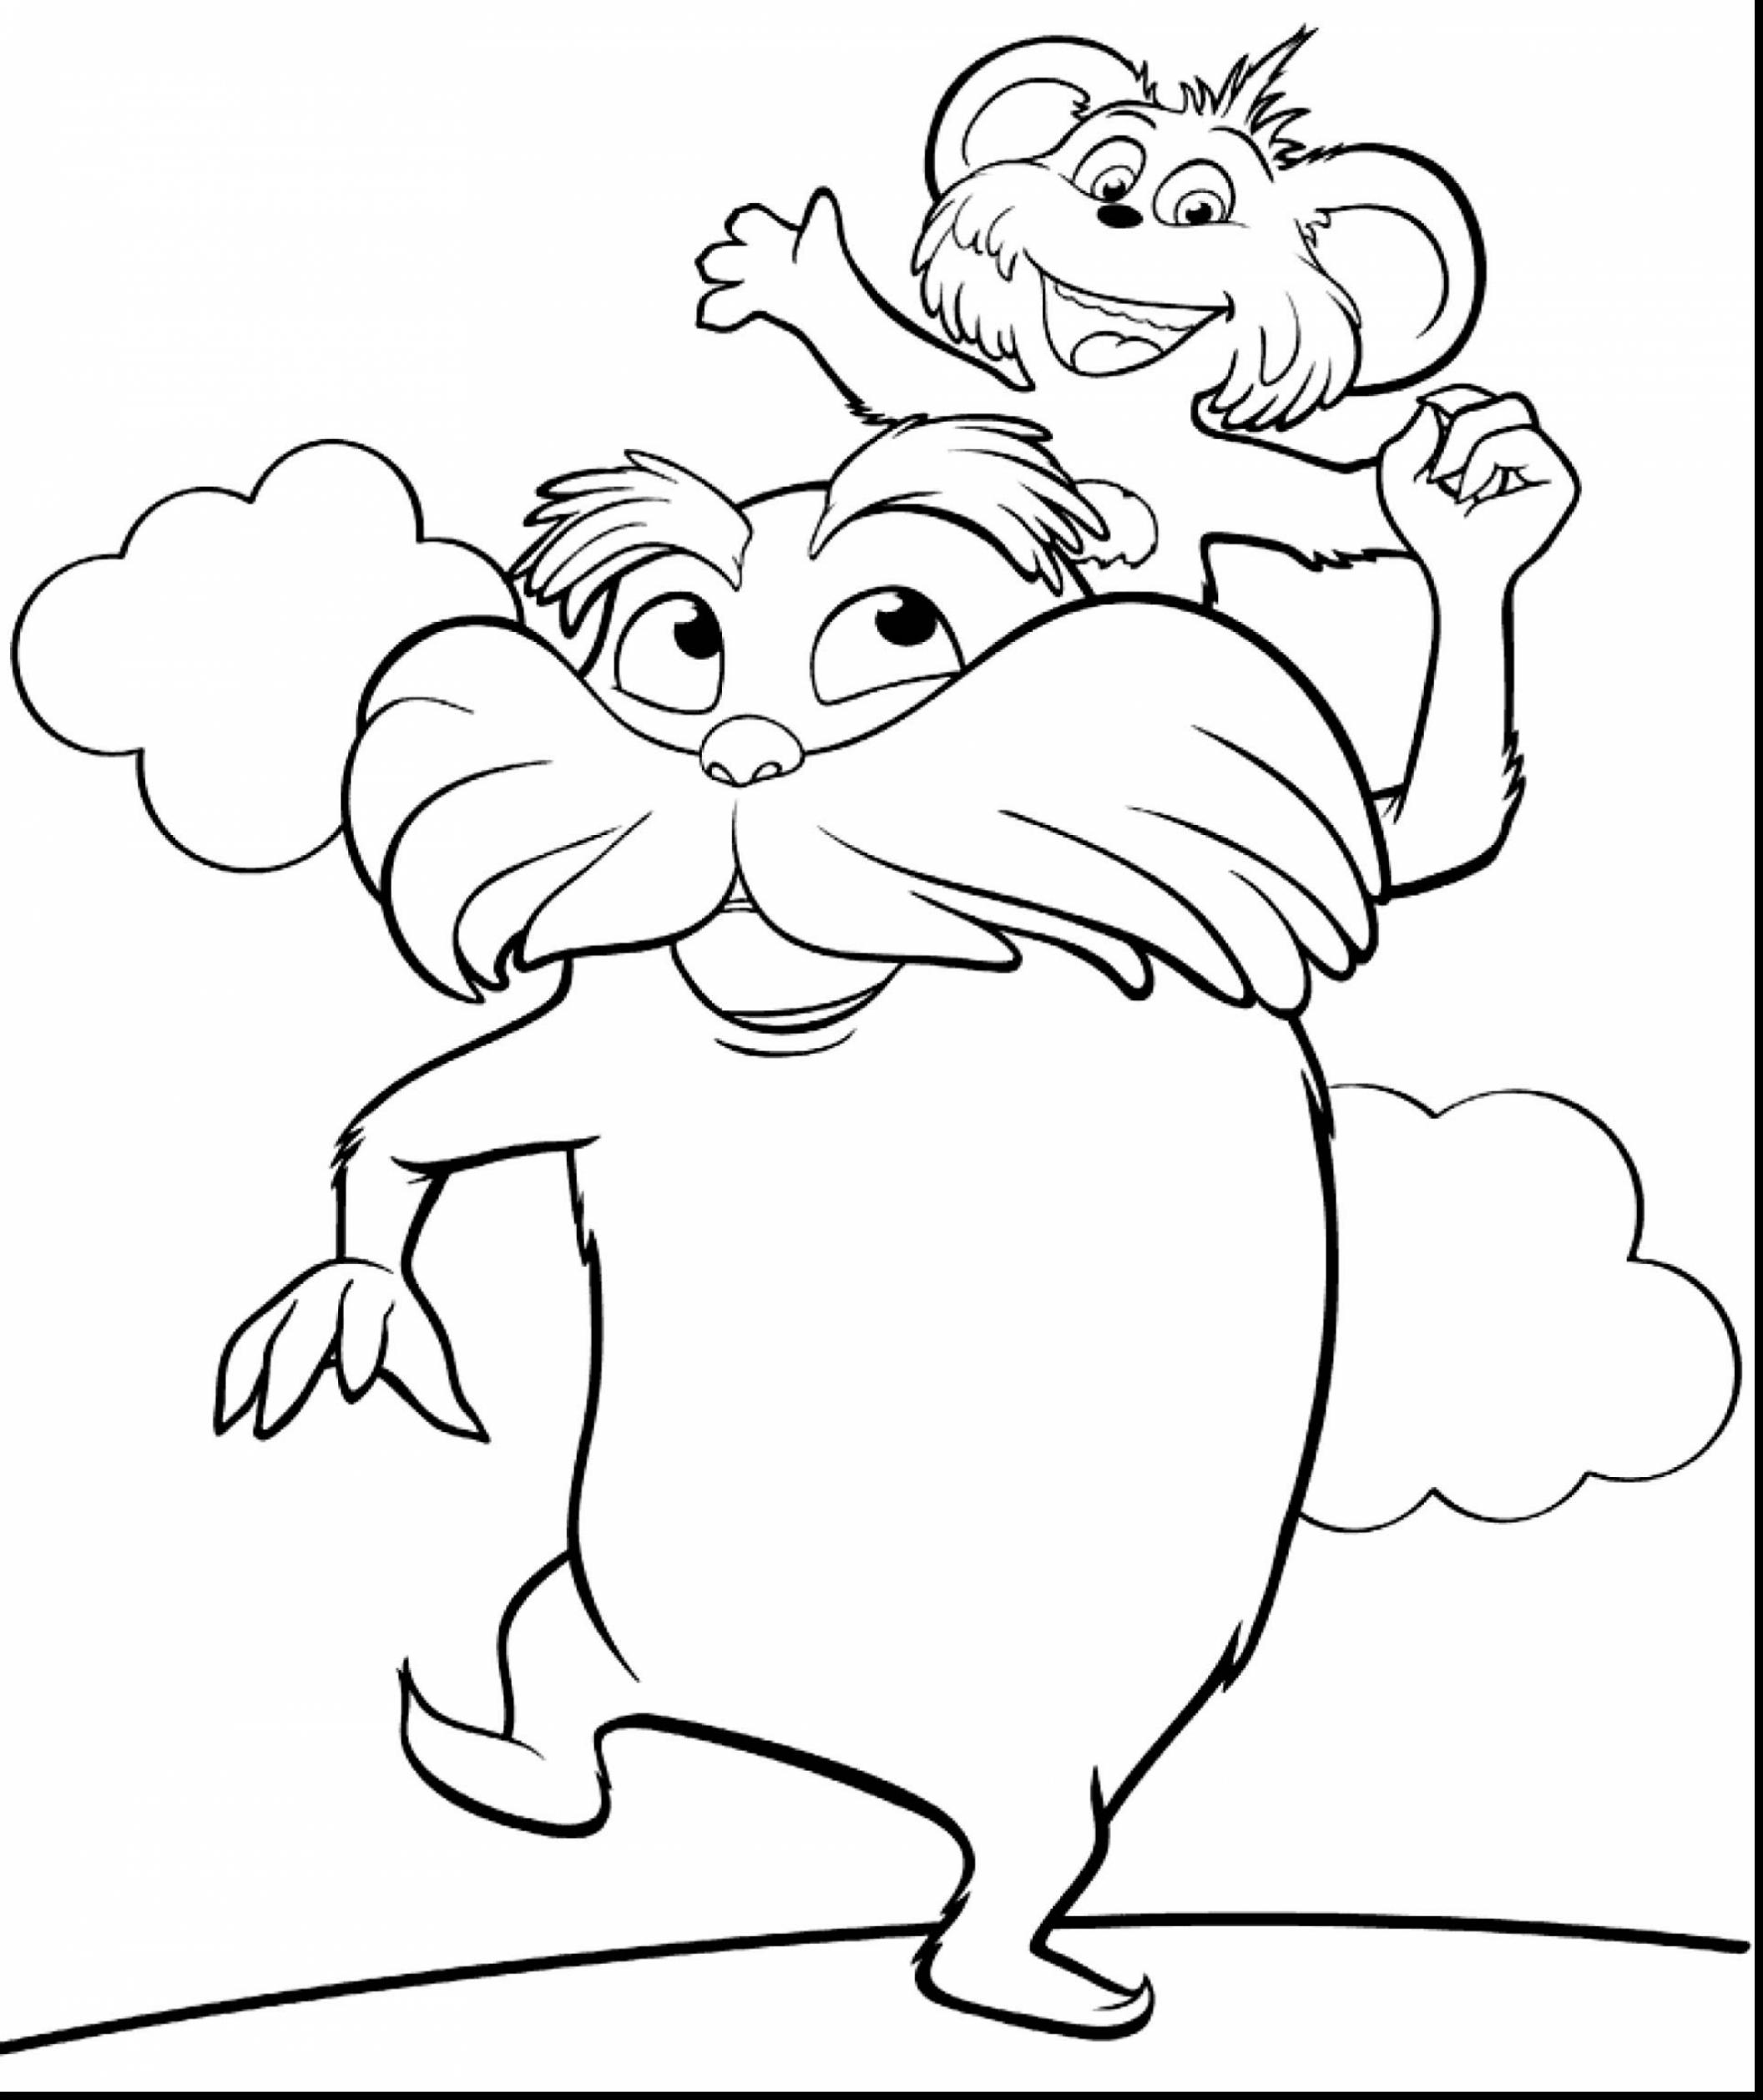 coloring-pages-free-printabler-seuss-coloring-pages-to-print-fox-in-socks-cat-the-hat-sheets